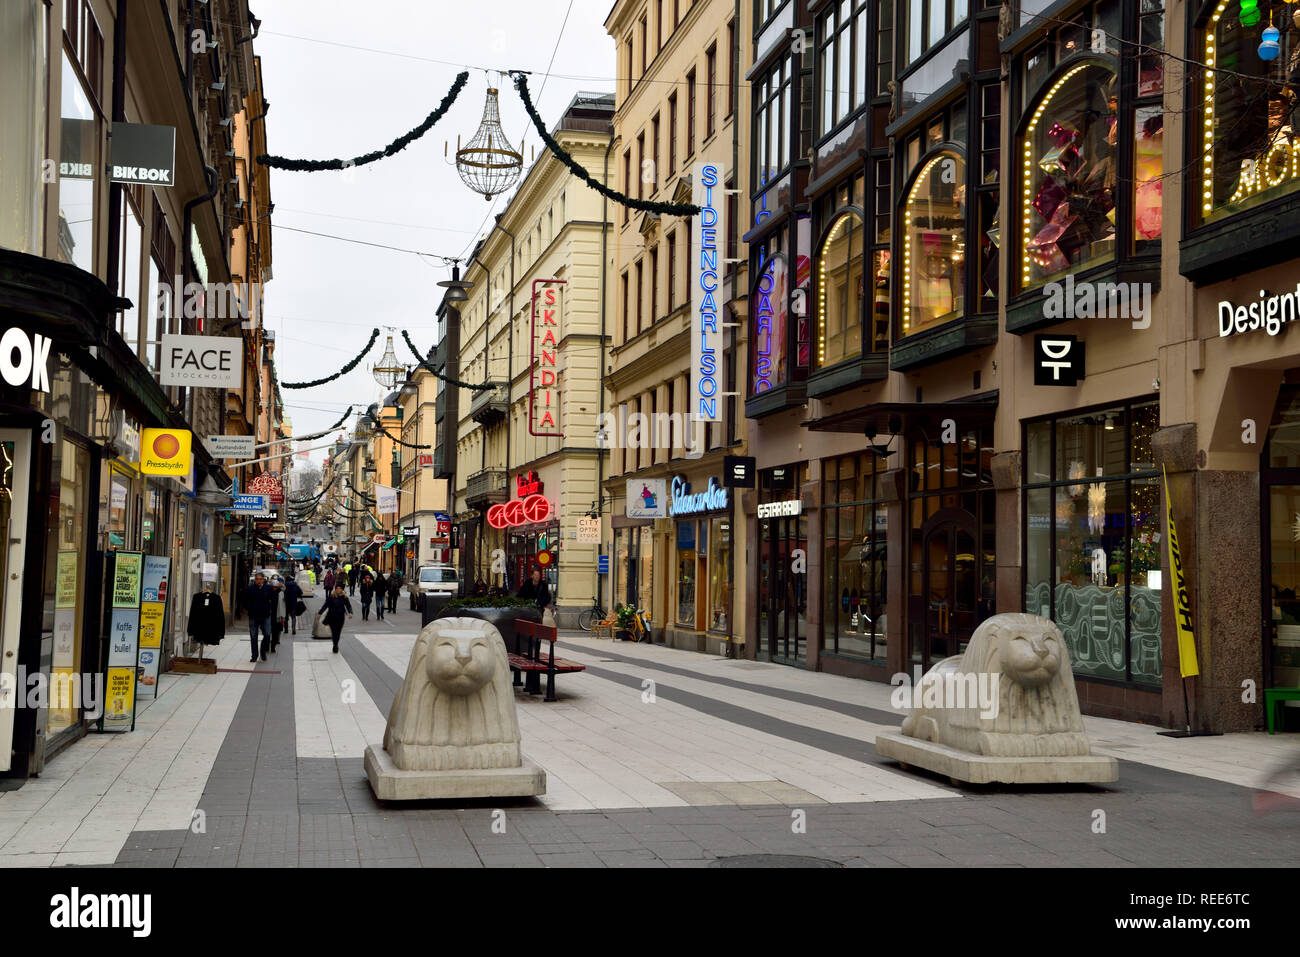 Stockholm, Sweden - November 20, 2018.  Drottninggatan street view in Stockholm, with residential and commercial properties and people. Stock Photo